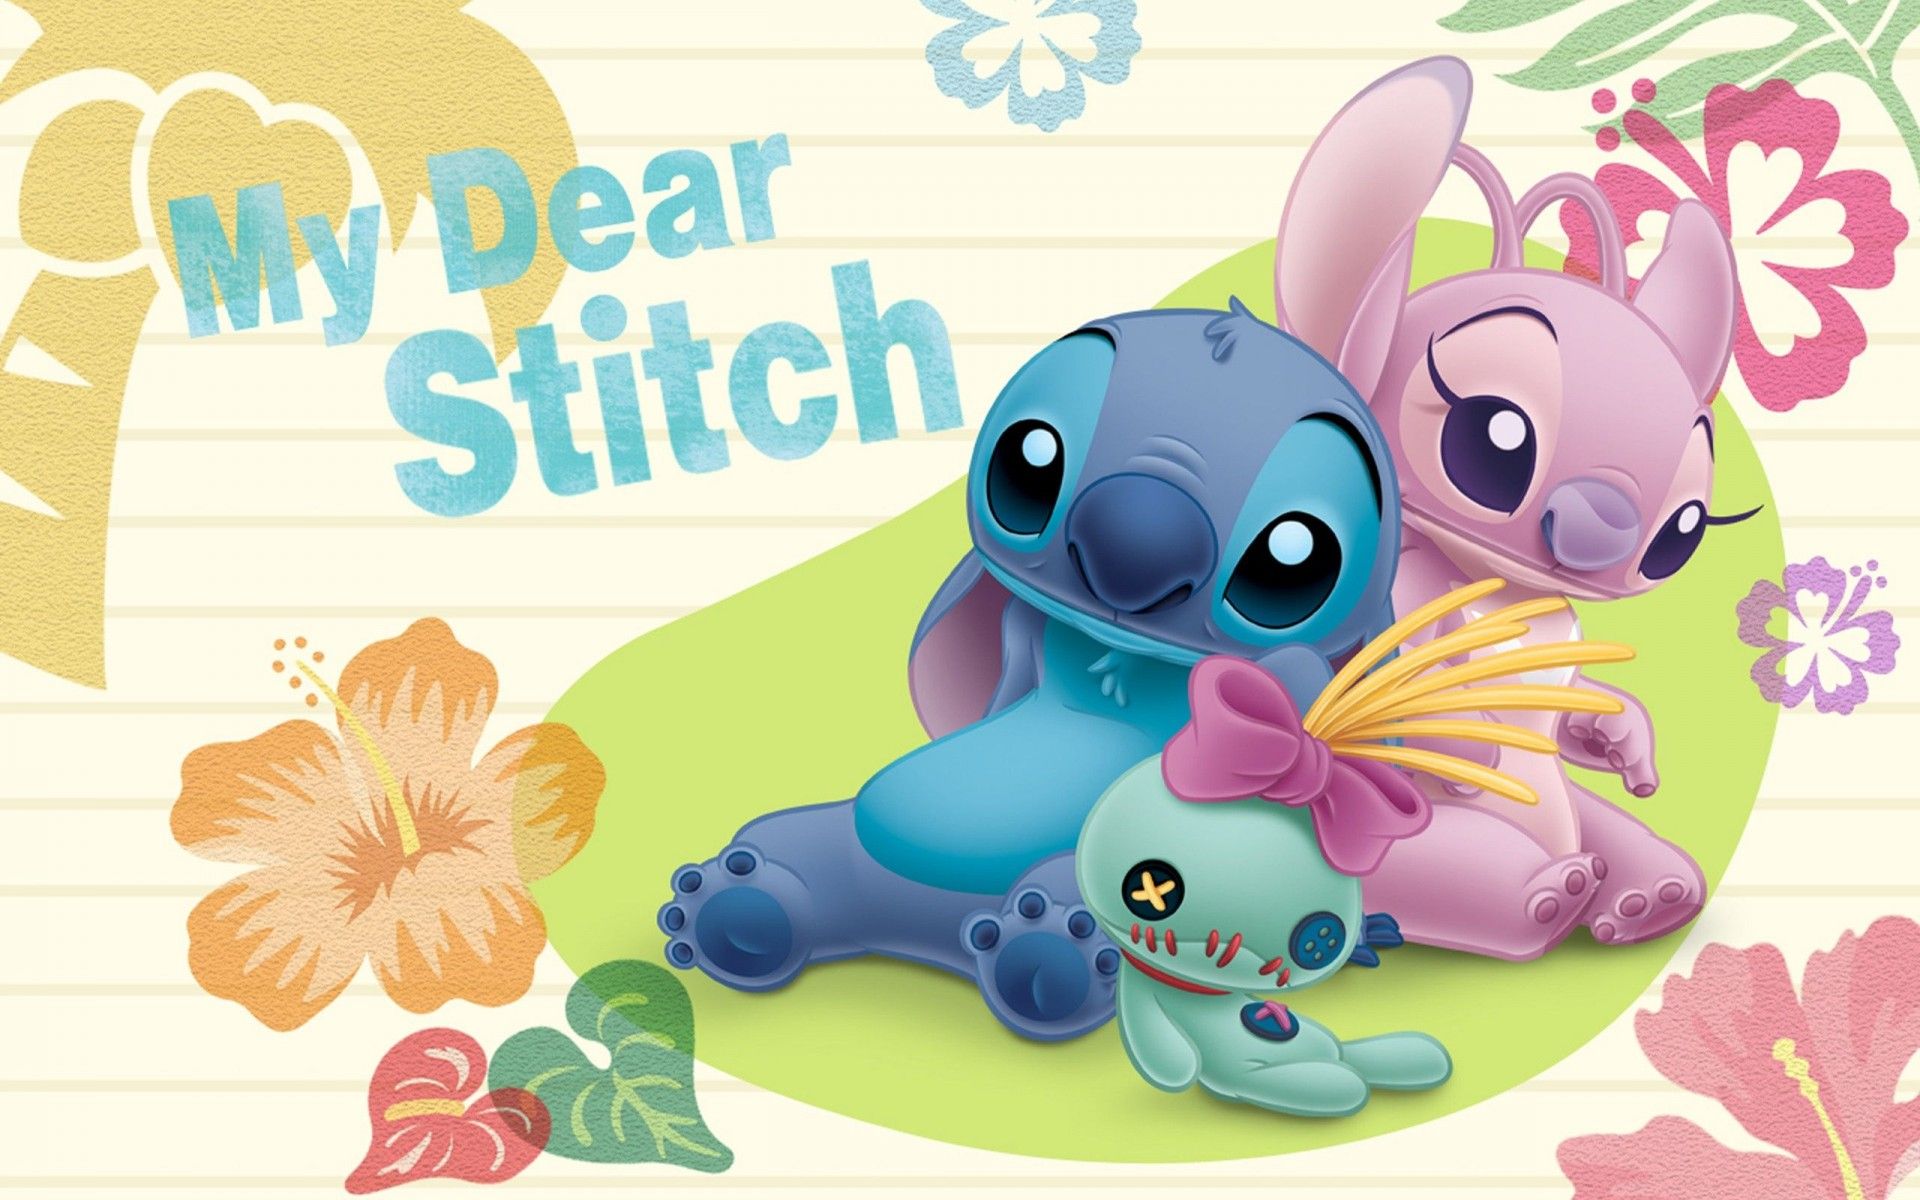 Lilo  Stitch wallpapers for desktop download free Lilo  Stitch pictures  and backgrounds for PC  moborg